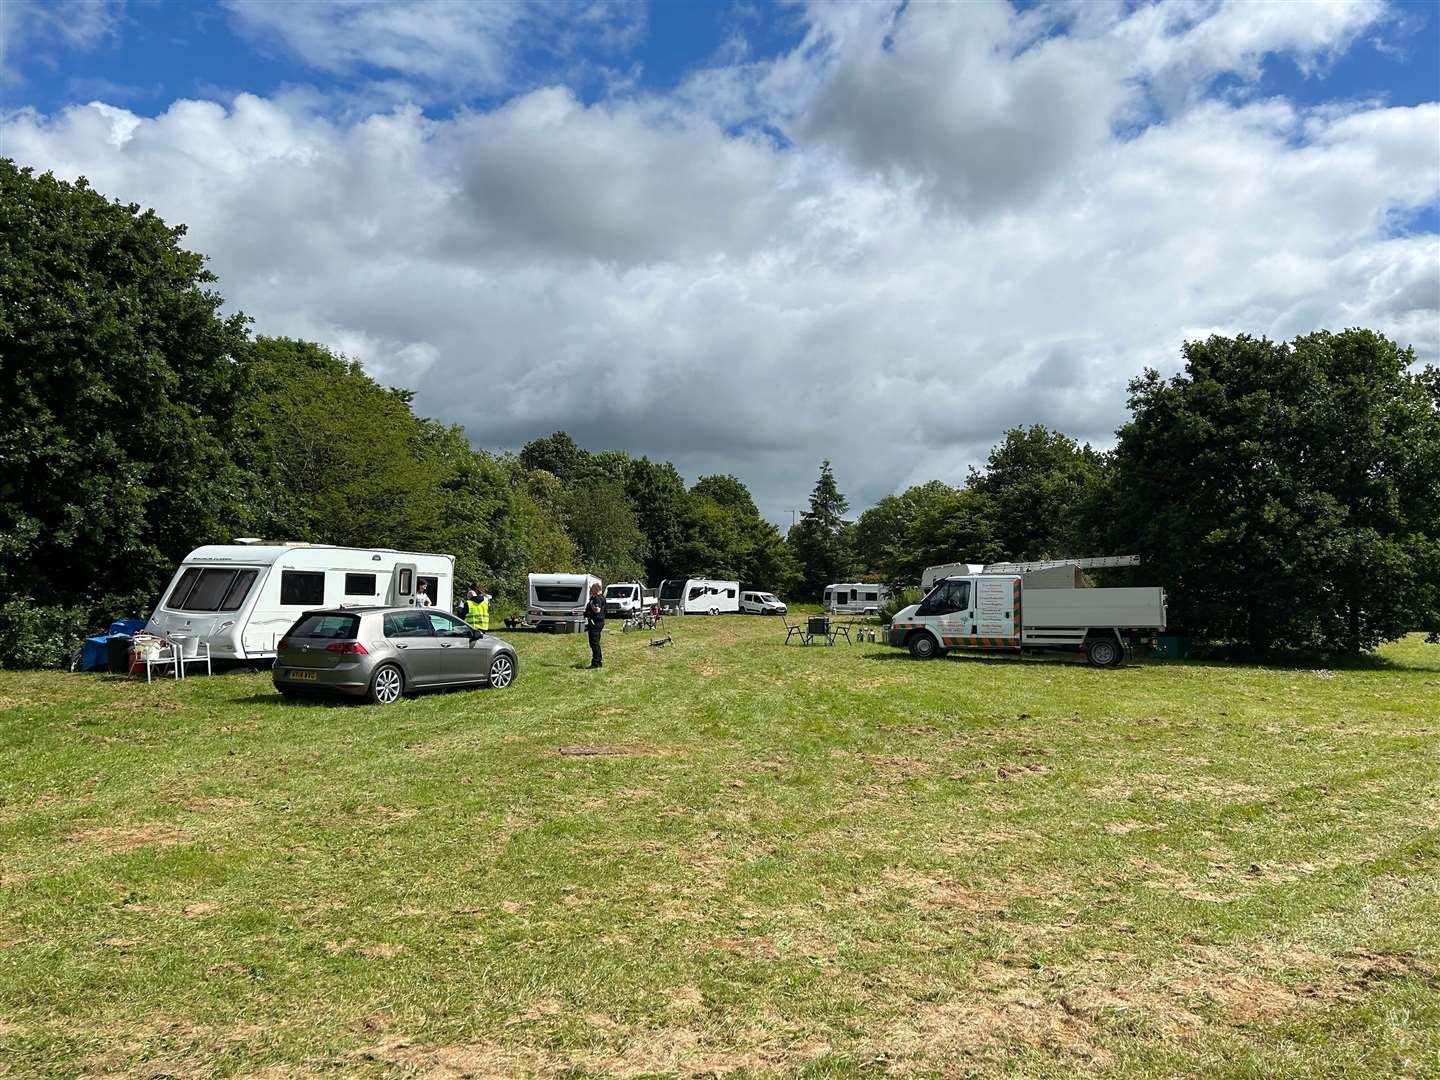 Around 10 caravans and vehicles have pitched up behind the Kinsnorth Recreation Centre in Ashford